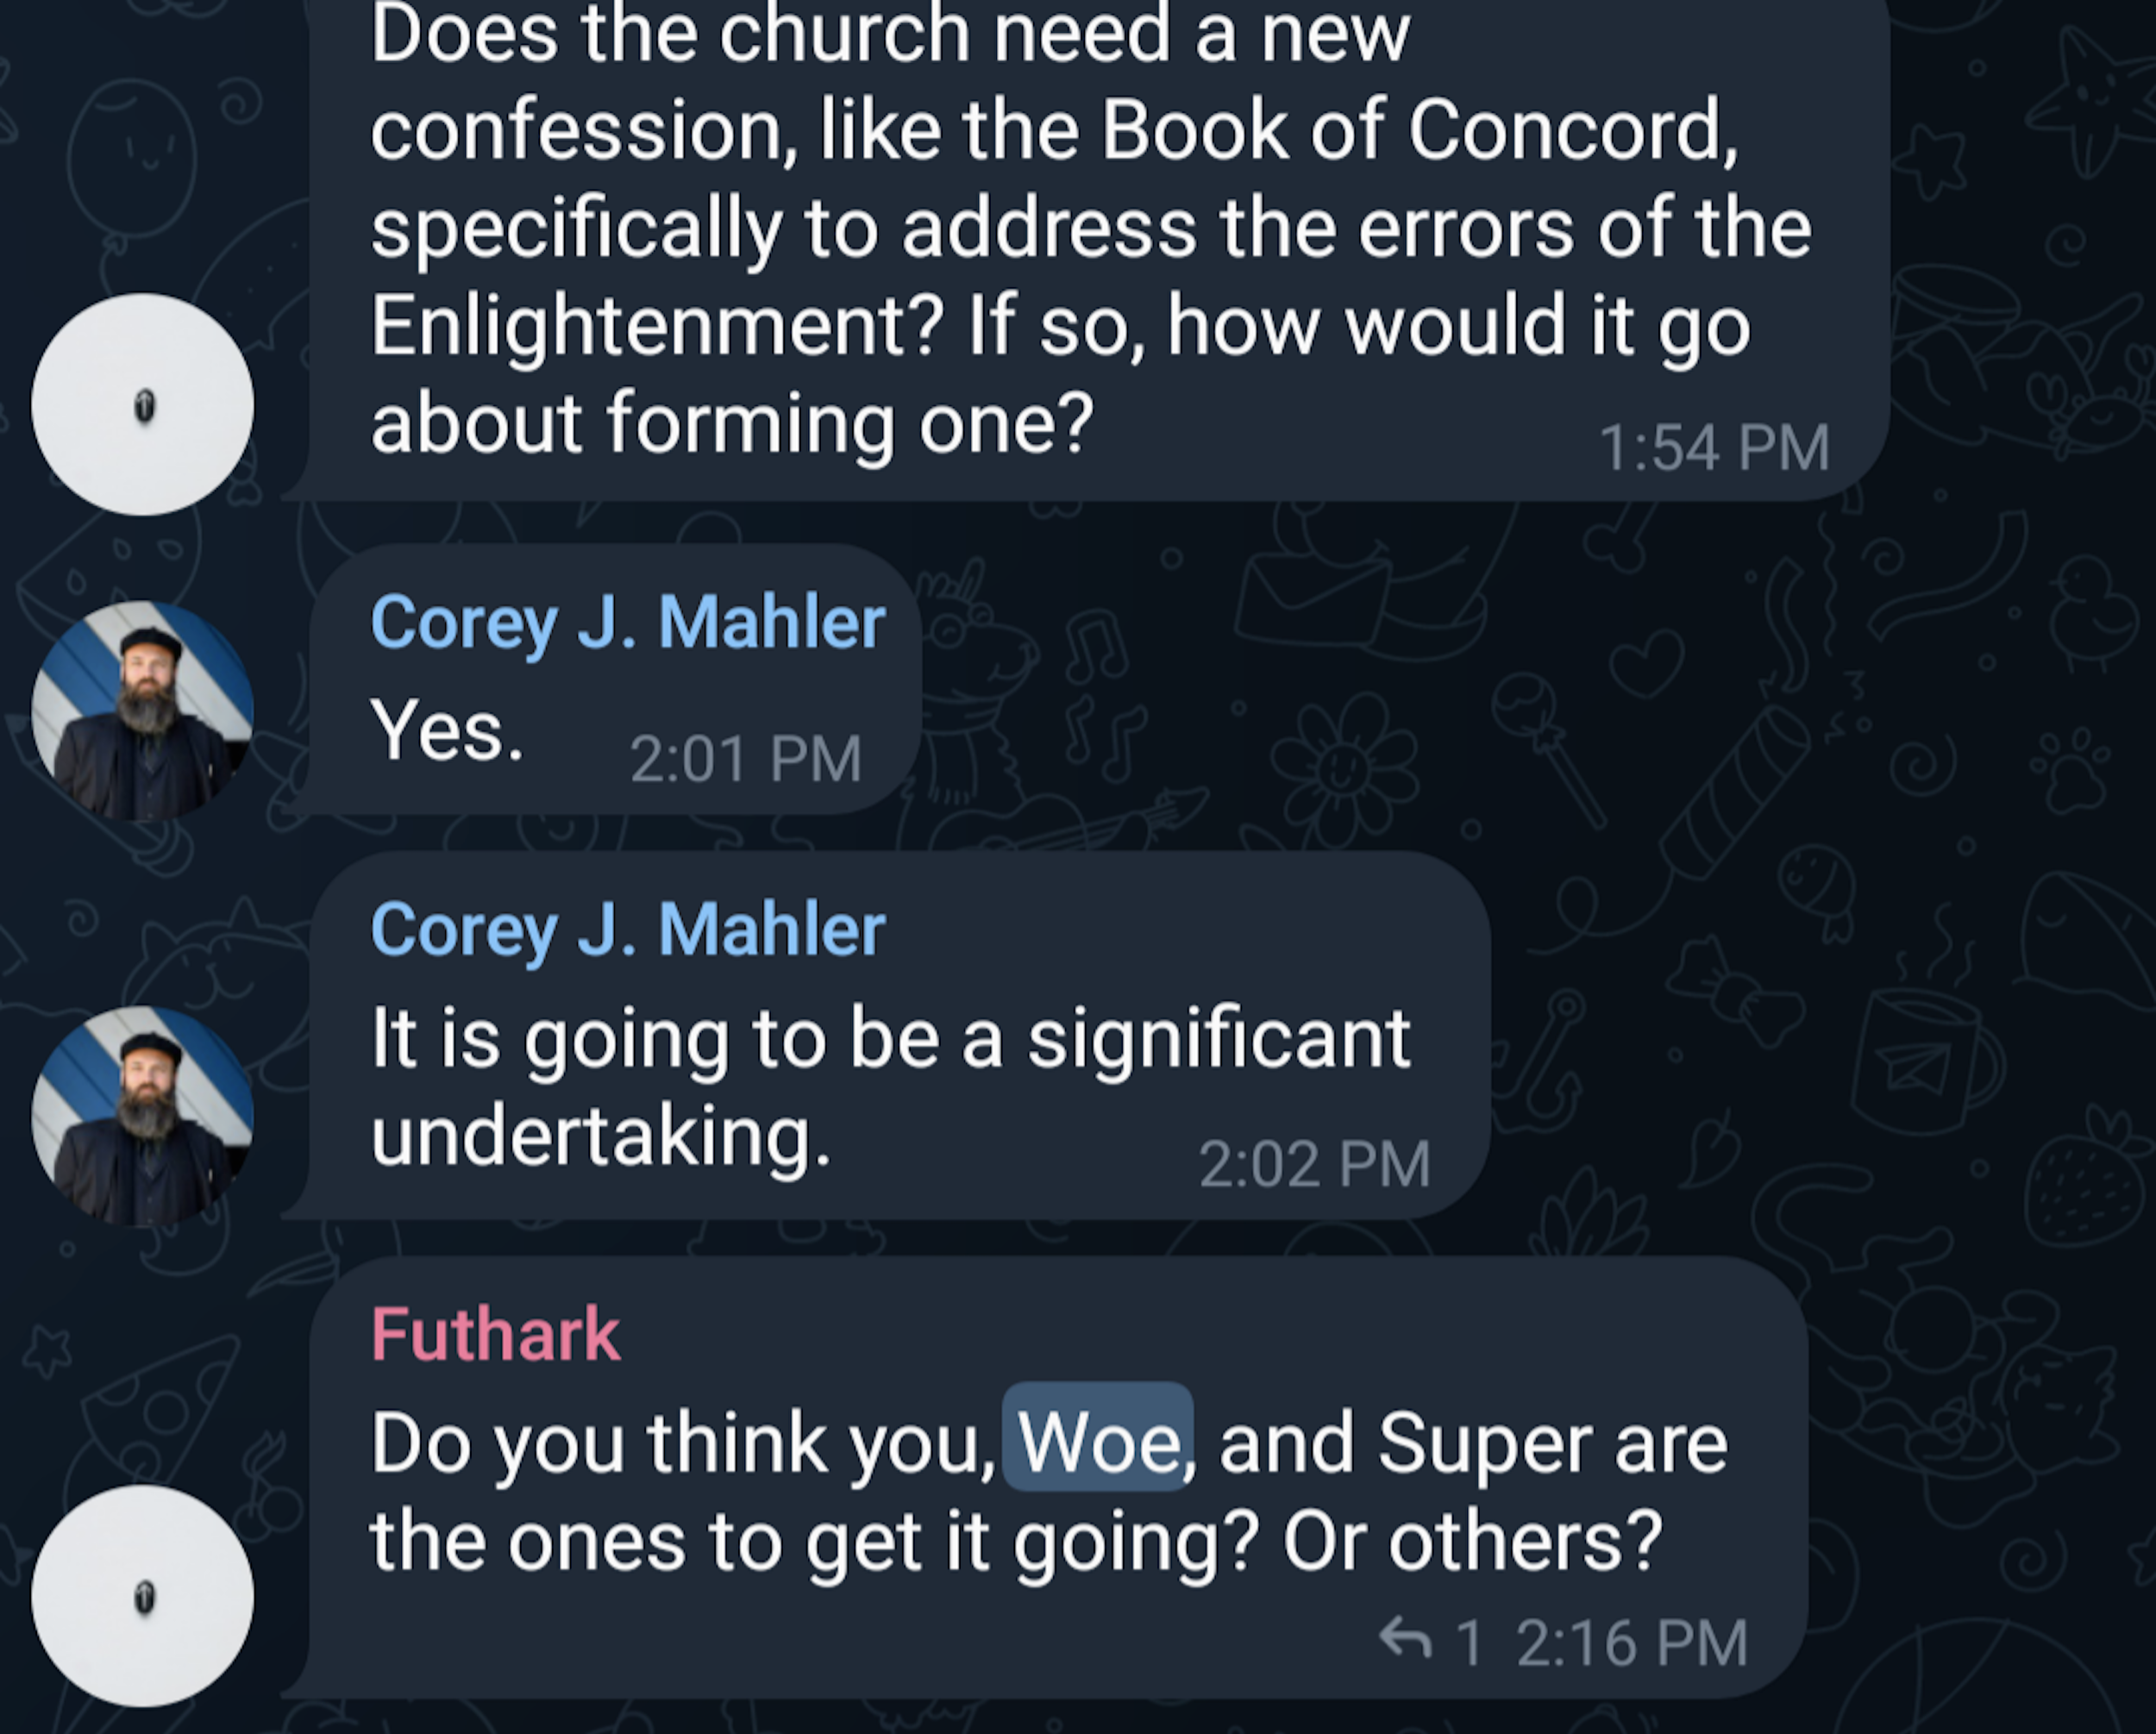 Telegram exchange in which Corey Mahler affirms someone else's question as to whether "The church needs a new confession, like the Book of Concord, to address the errors of the Enlightenment"